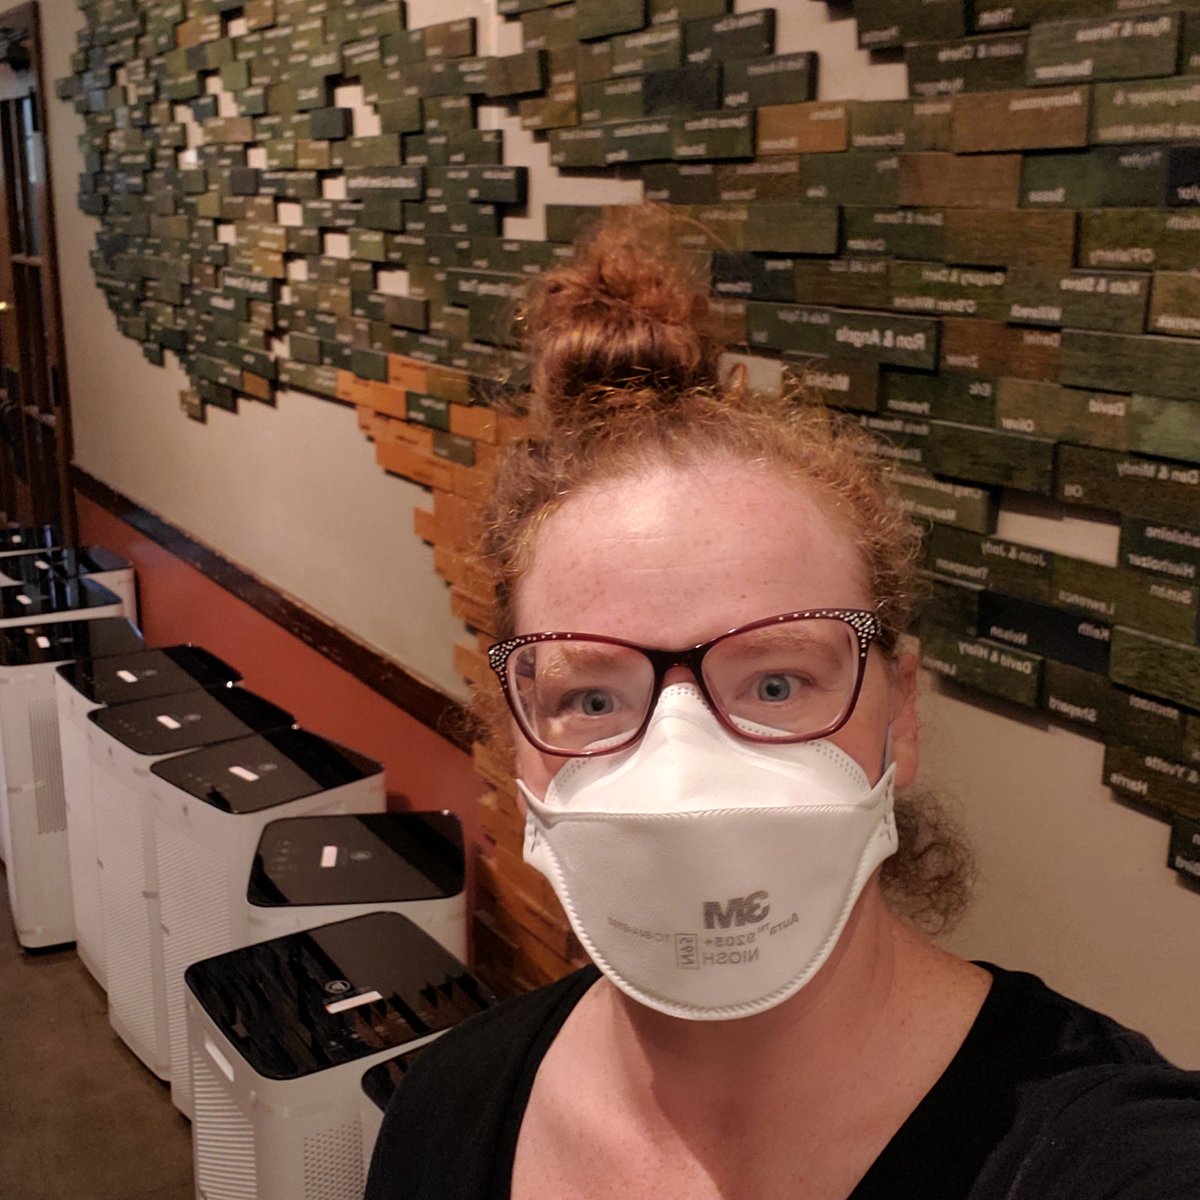 Happily installing medify air purifiers in every classroom and meeting space at my kiddos school. I am sore and I only stopped for a couple of water breaks for 8 hours, but I'm SO happy. #CovidIsIAirborne #CovidIsNotOver #CleanTheAirWeShare 
#MaskUp